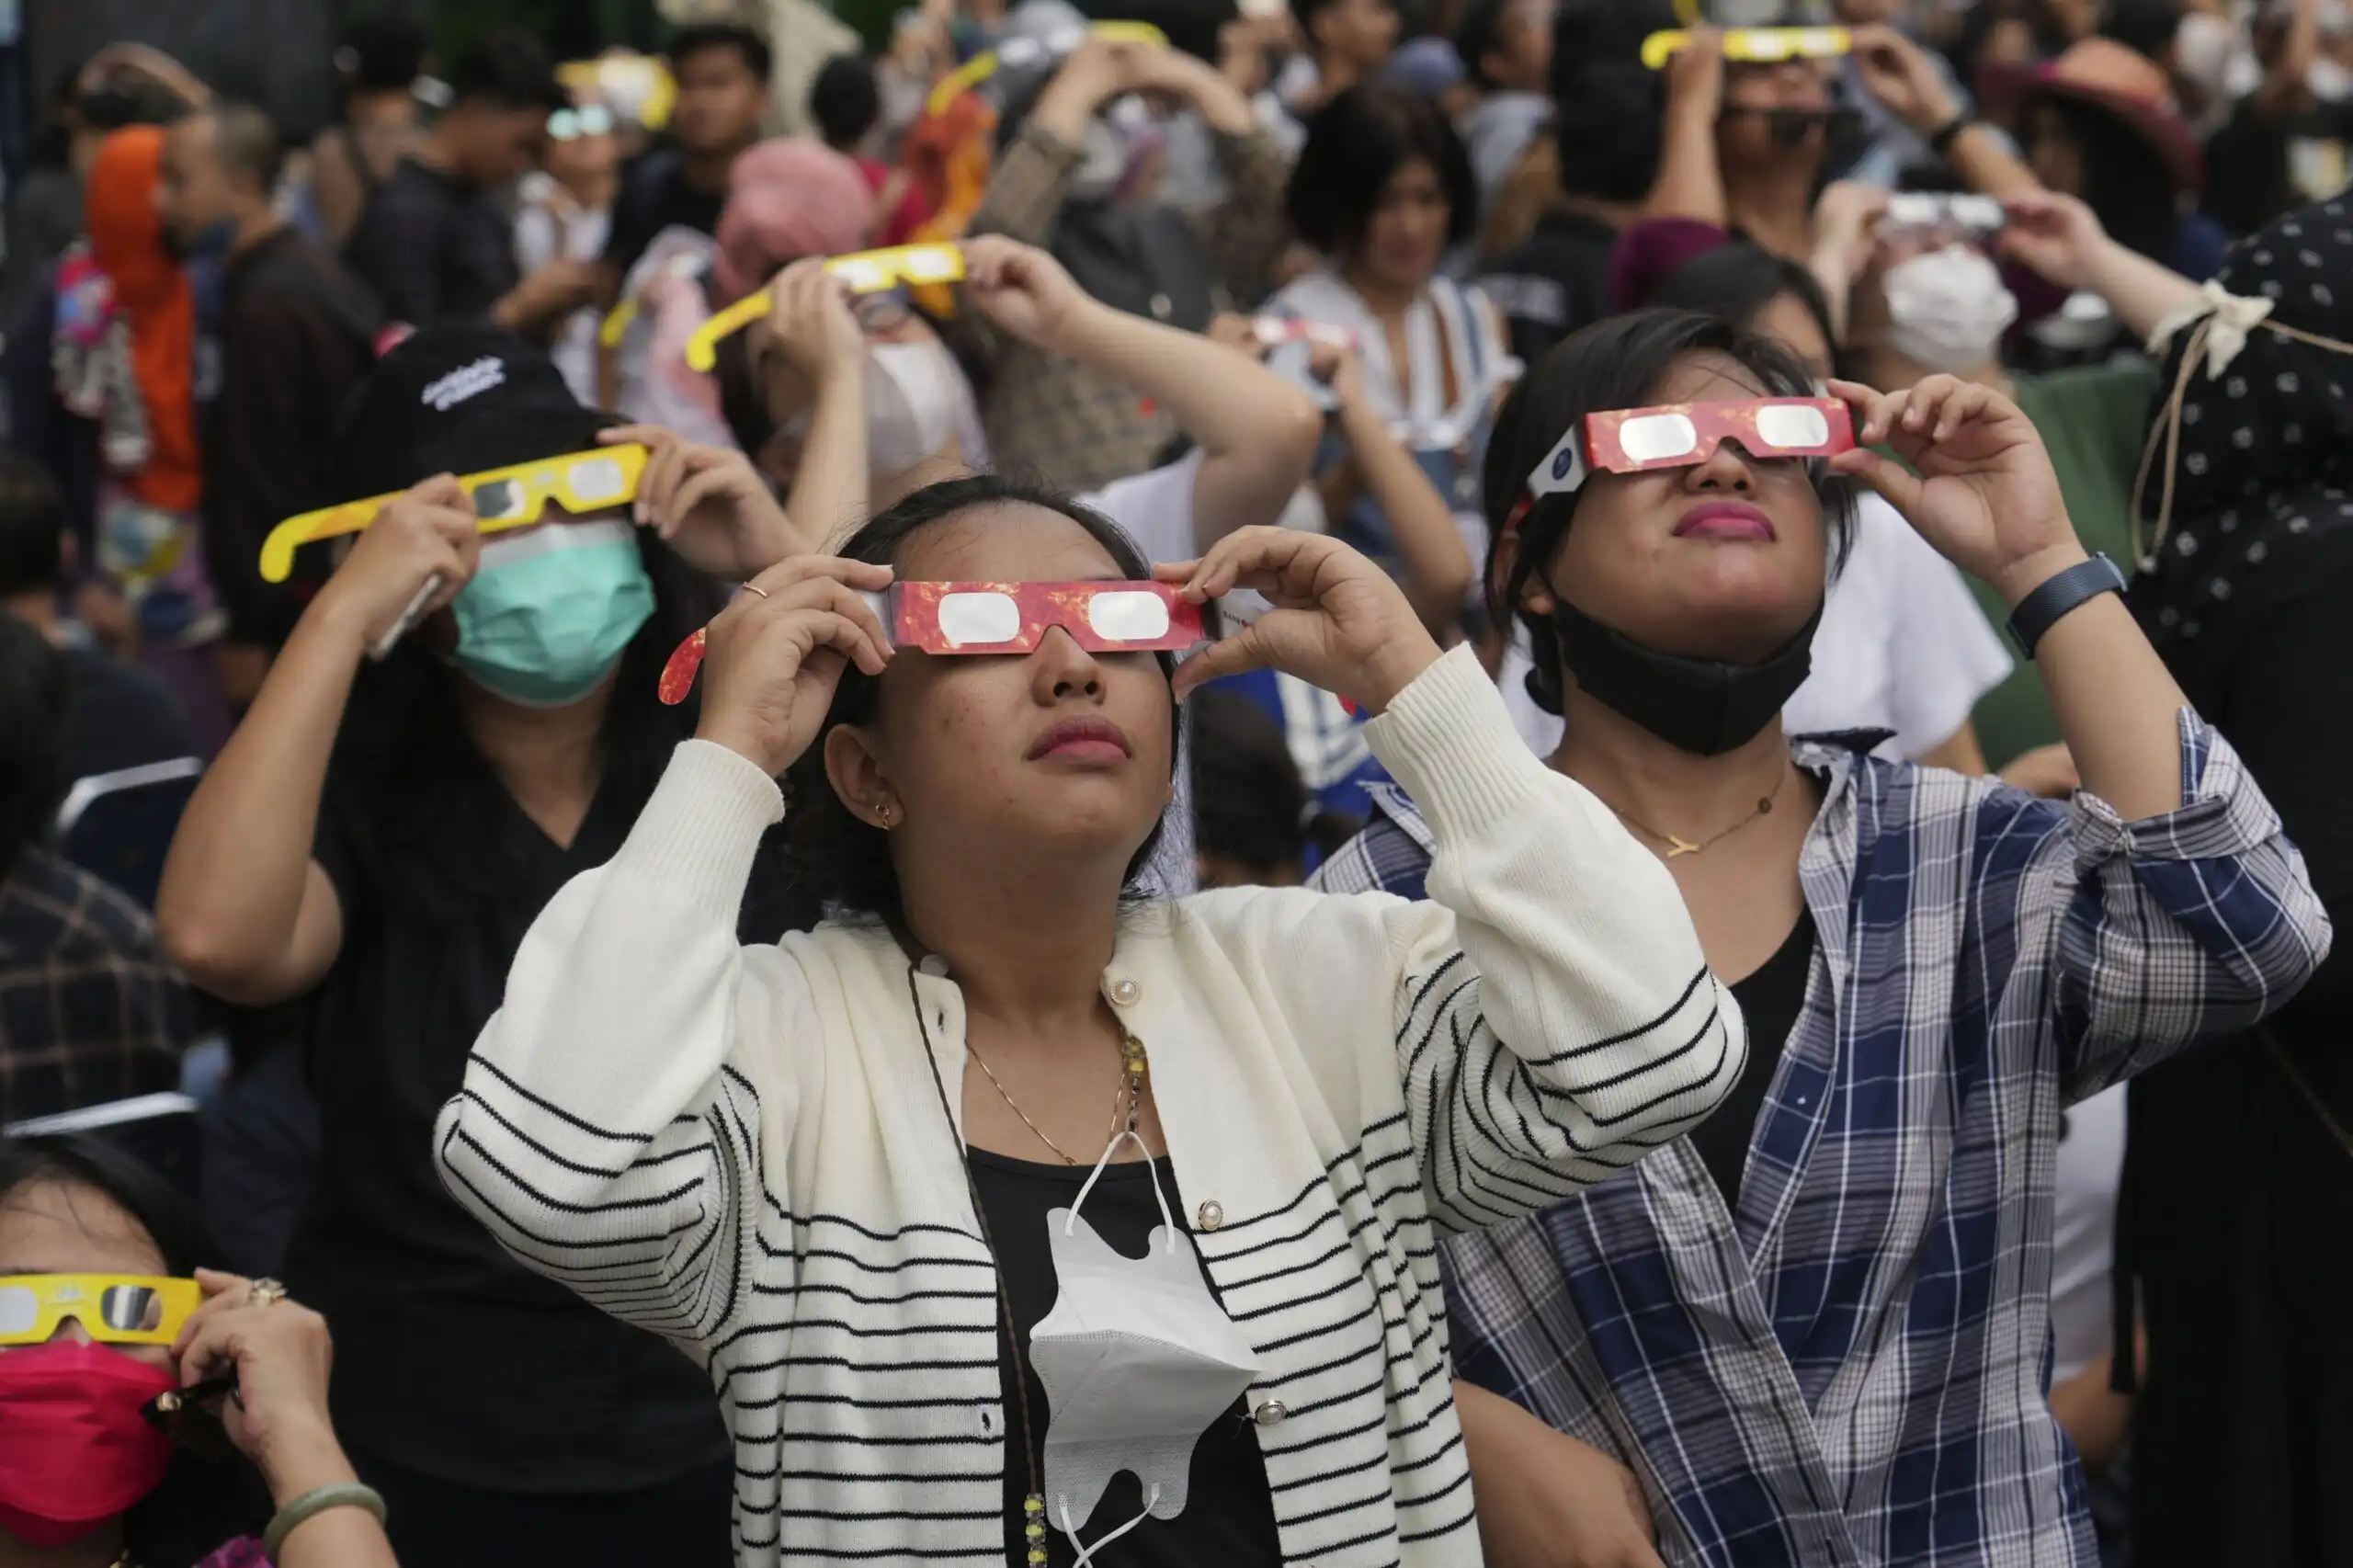 Buy counterfeit eclipse glasses: where to purchase authentic ones - ExBulletin